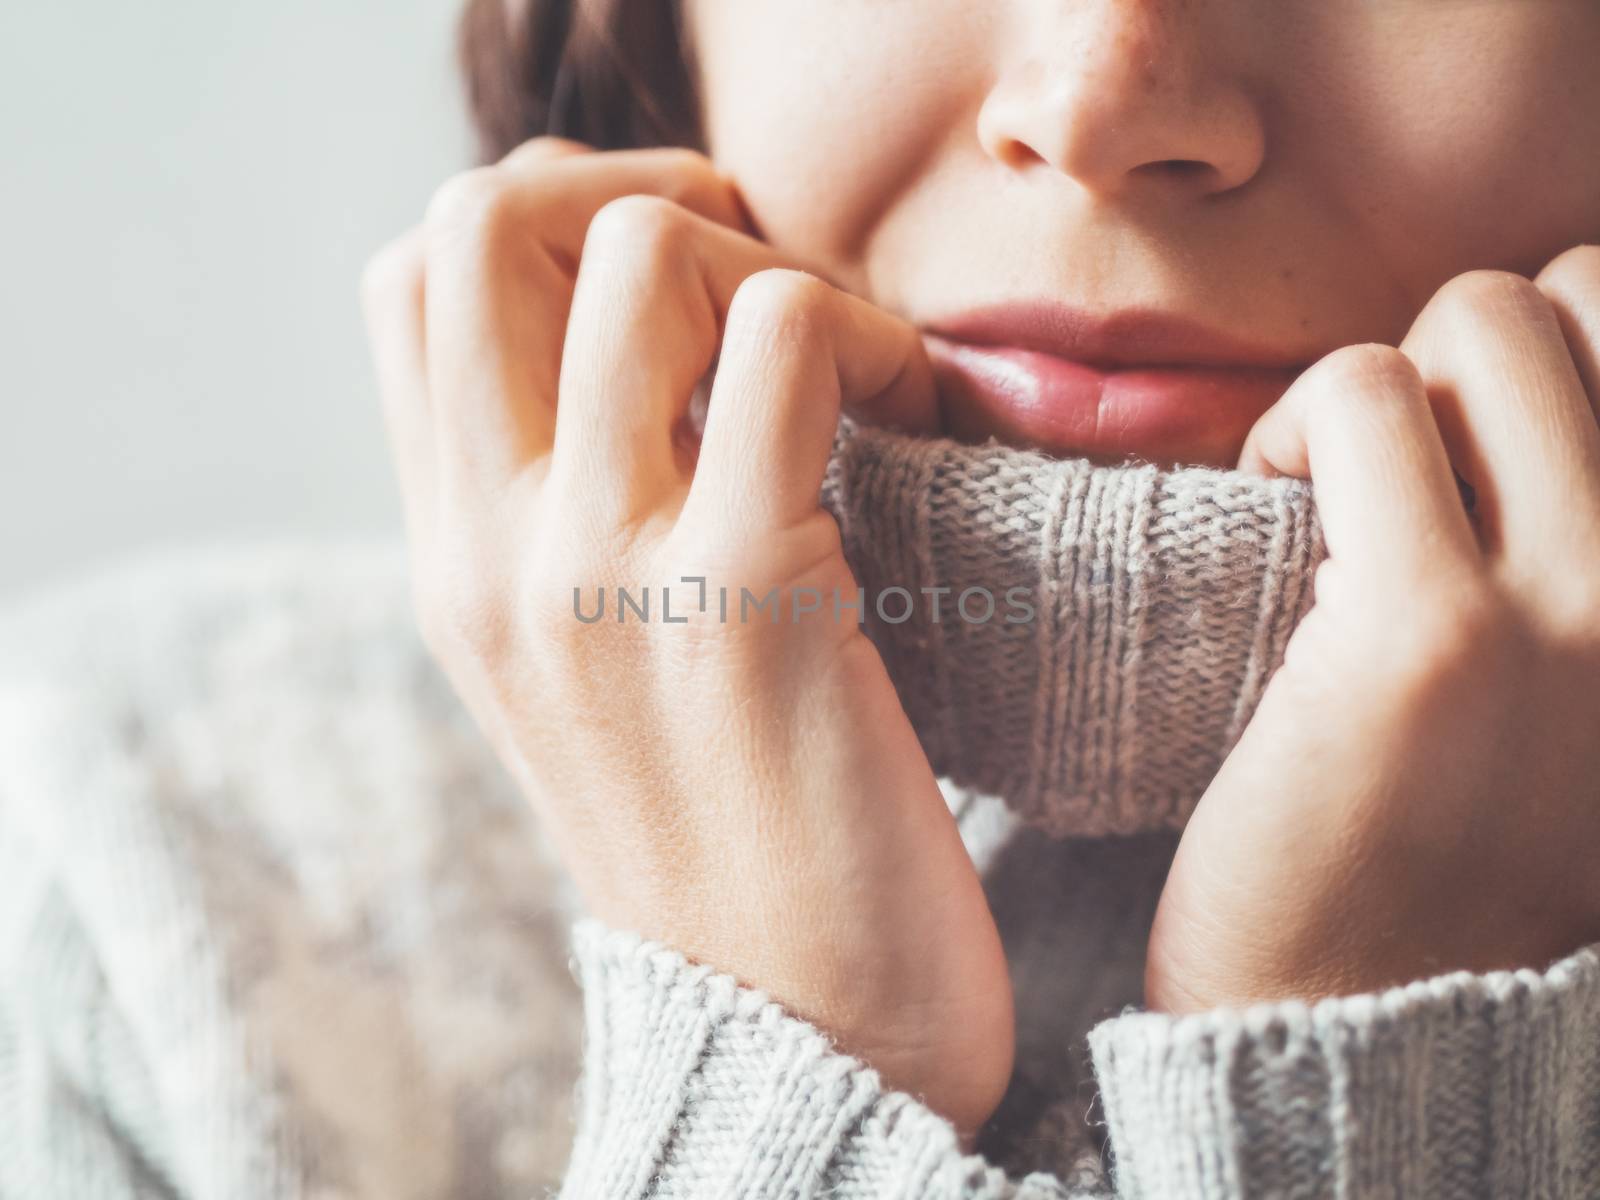 Close up portrait of woman snuggling in warm grey sweater. Casual outfit for cold weather at winter season.